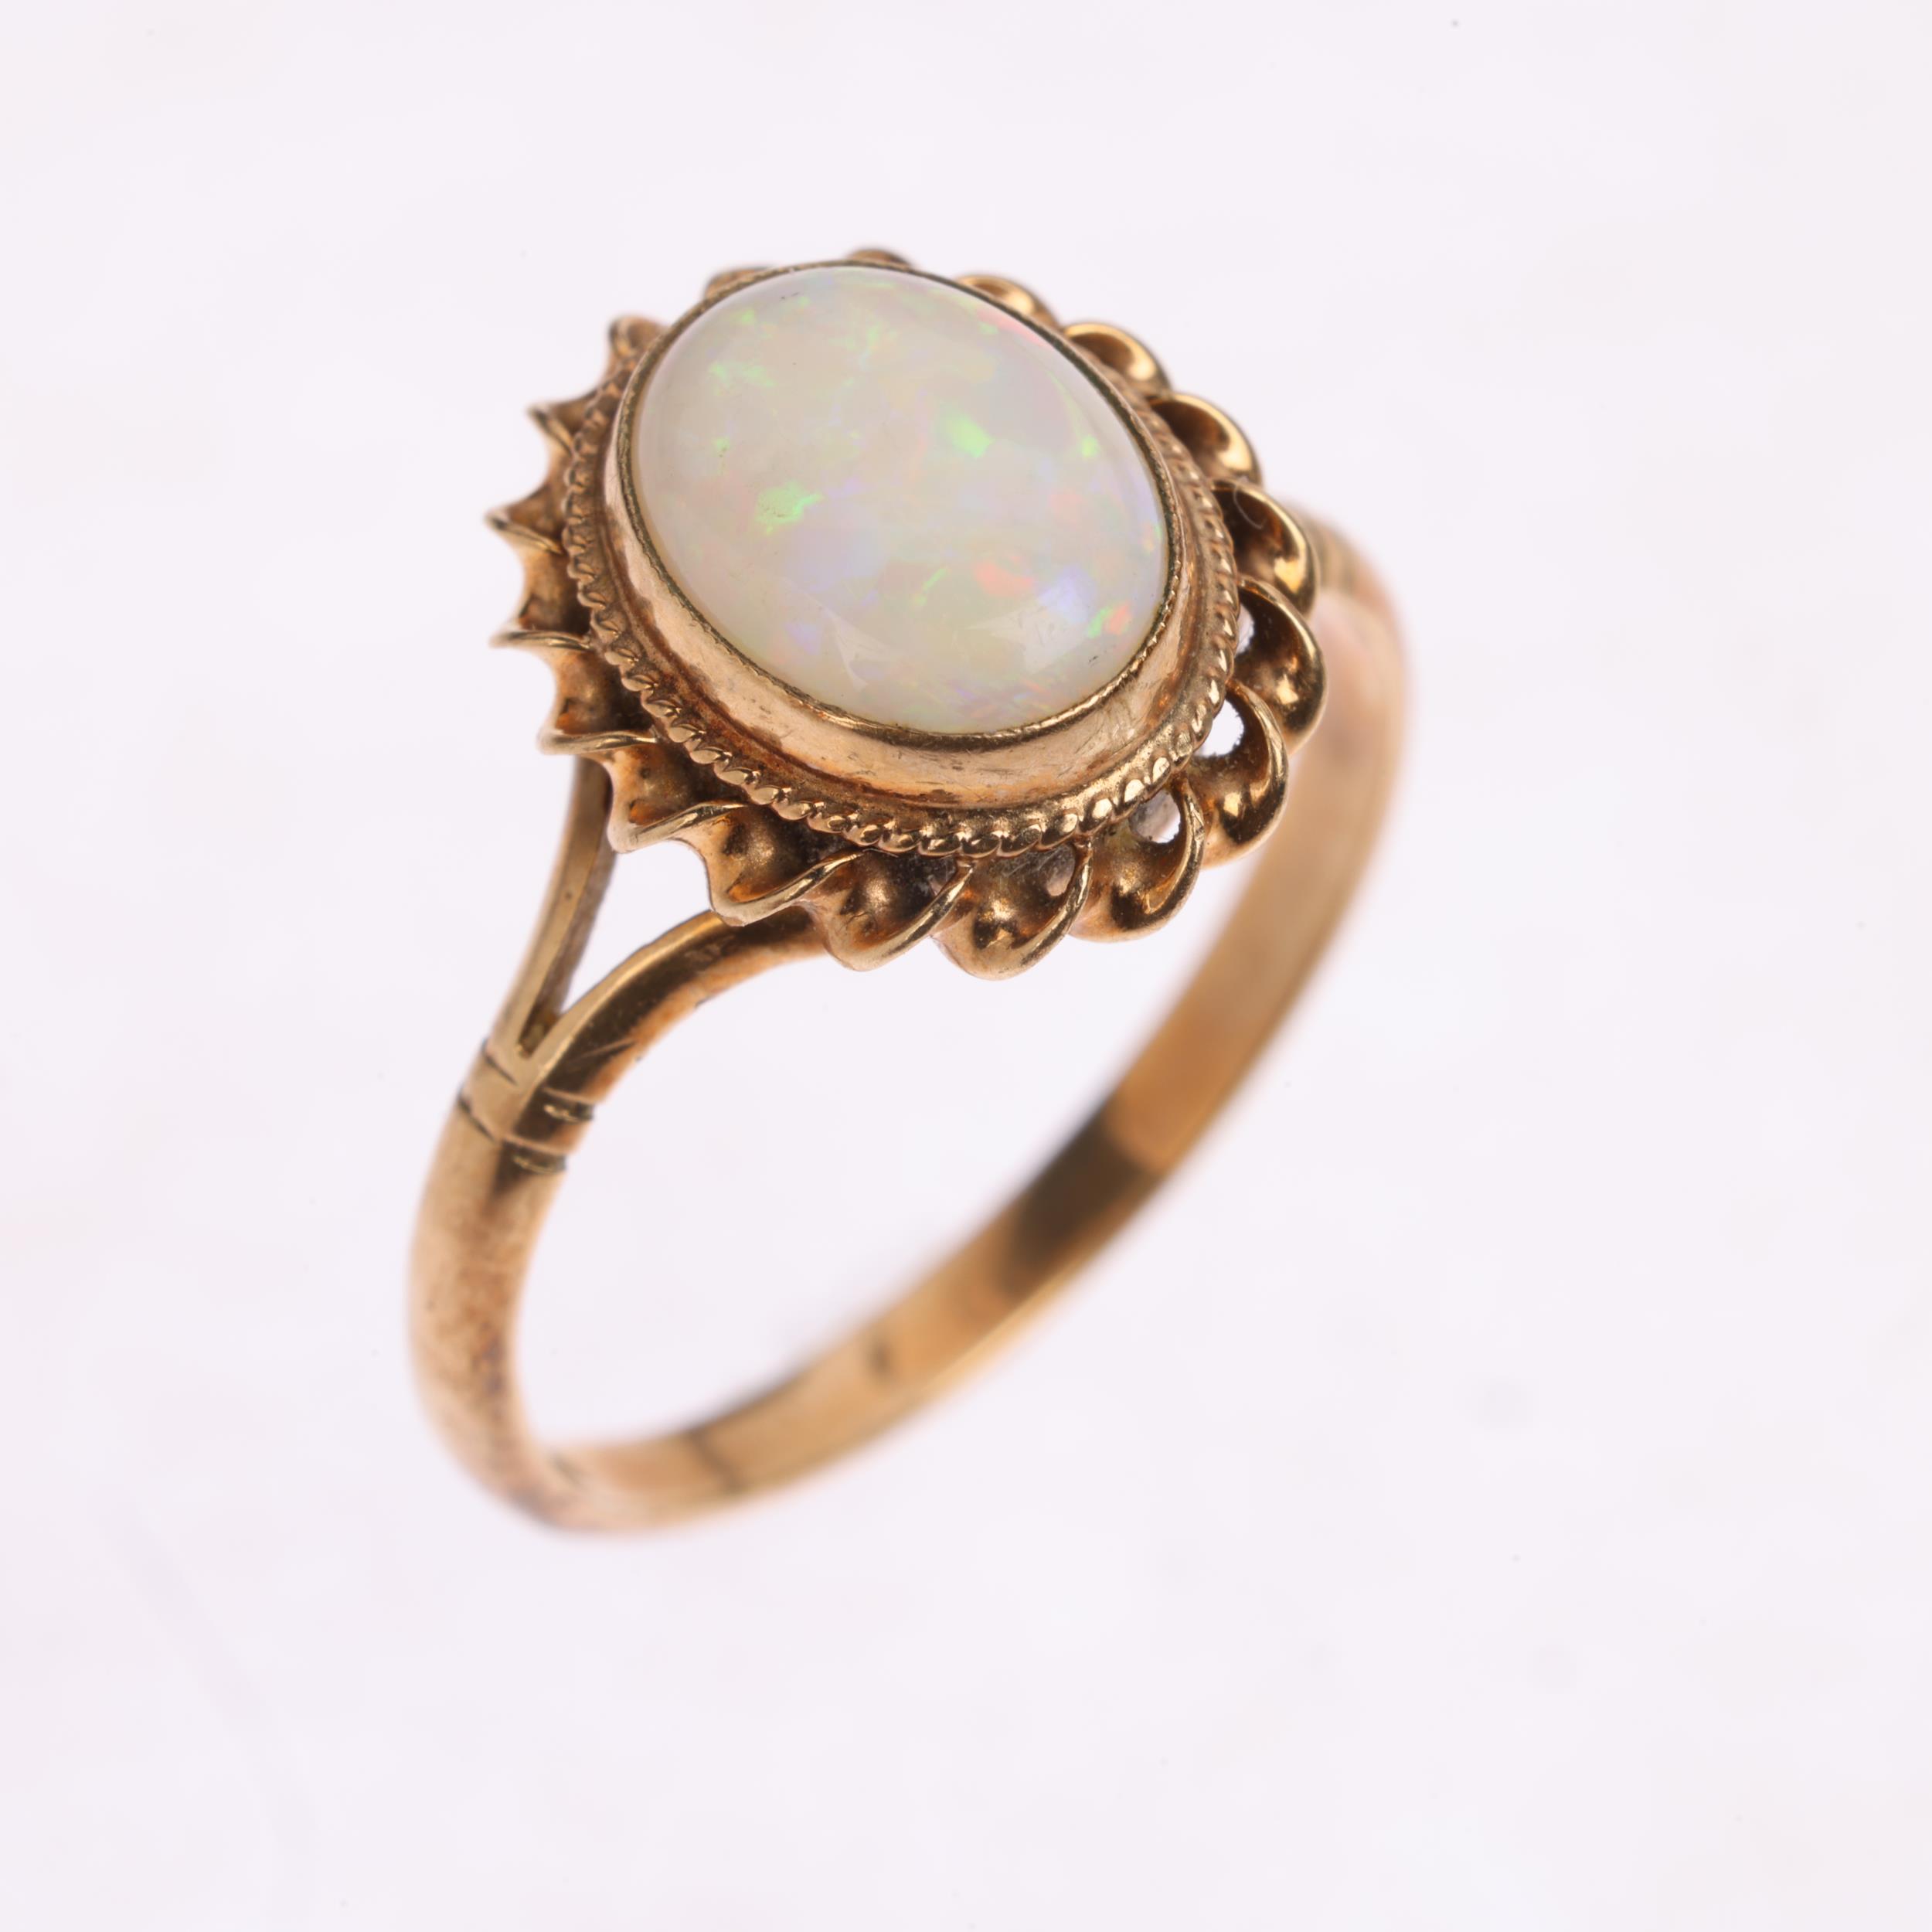 A 9ct gold solitaire opal dress ring, maker CG&S, Birmingham 1986, rub-over set with oval cabochon - Image 2 of 4